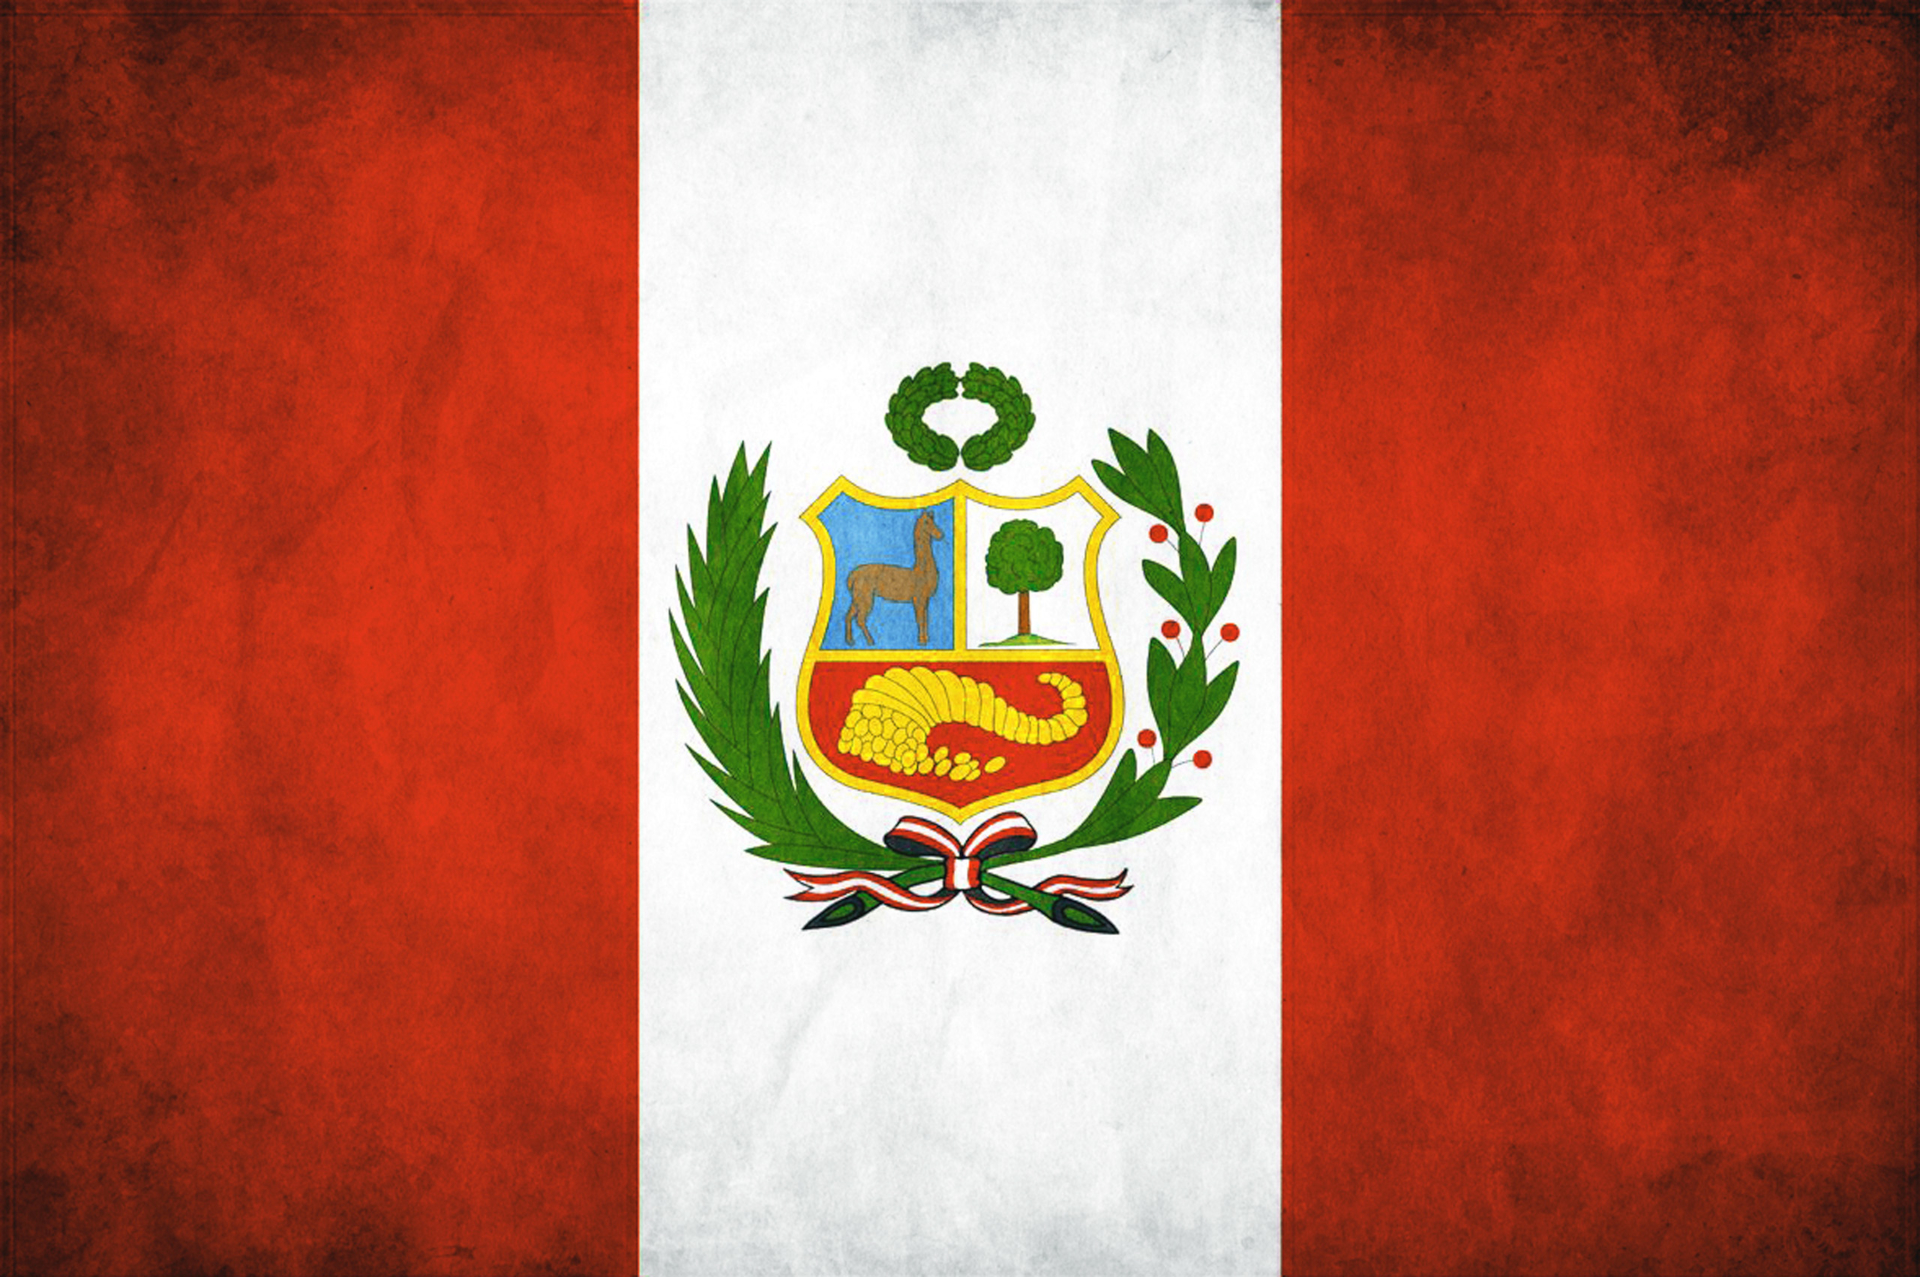 Download wallpapers Peruvian metal flag grunge art South American  countries Day of Peru national symbols Peru flag metal flags Flag of  Peru South America Peruvian flag Peru for desktop free Pictures for